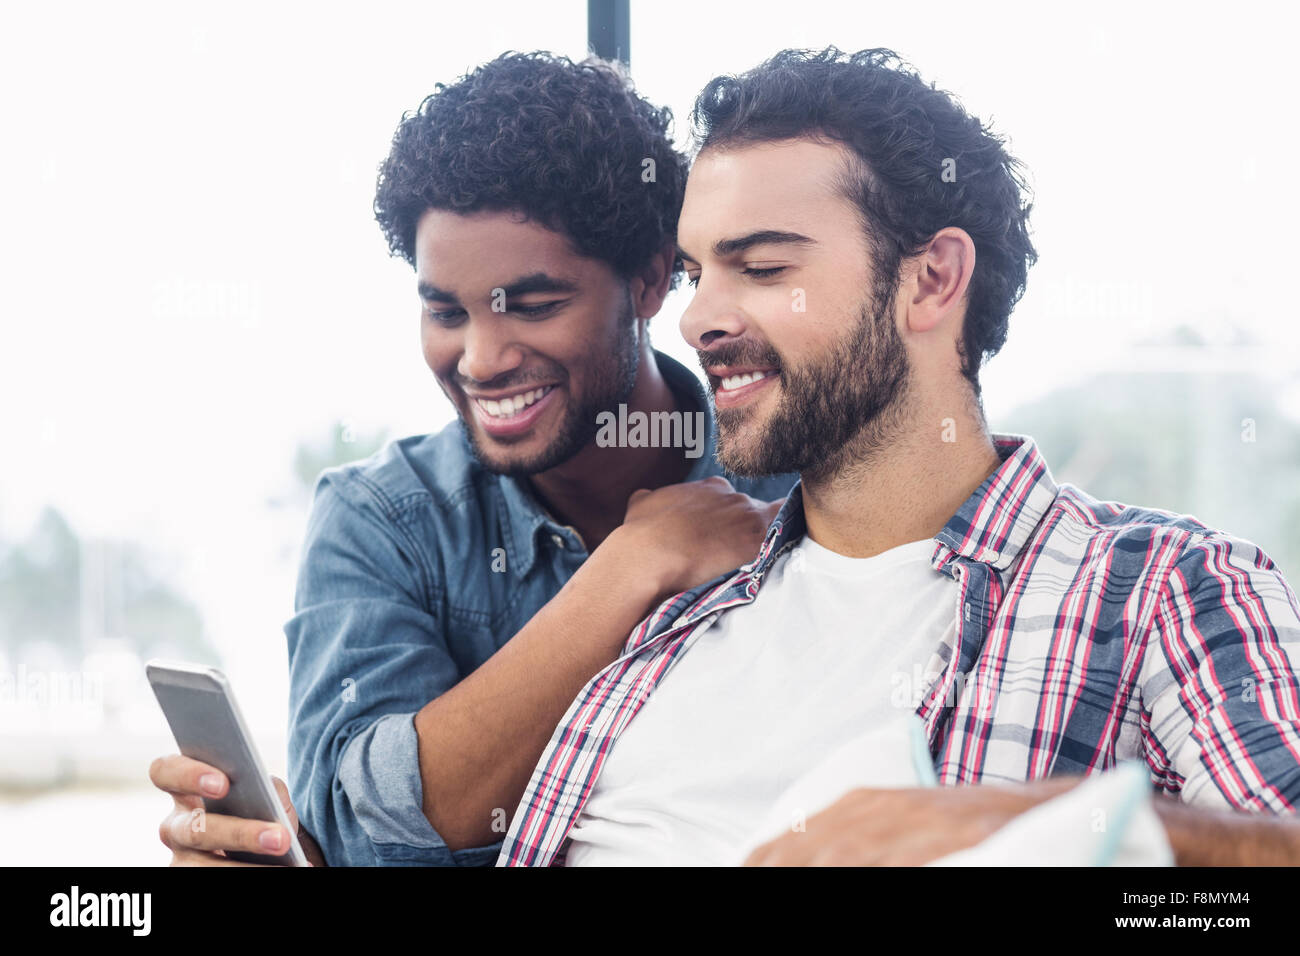 Happy gay couple using smartphone Banque D'Images